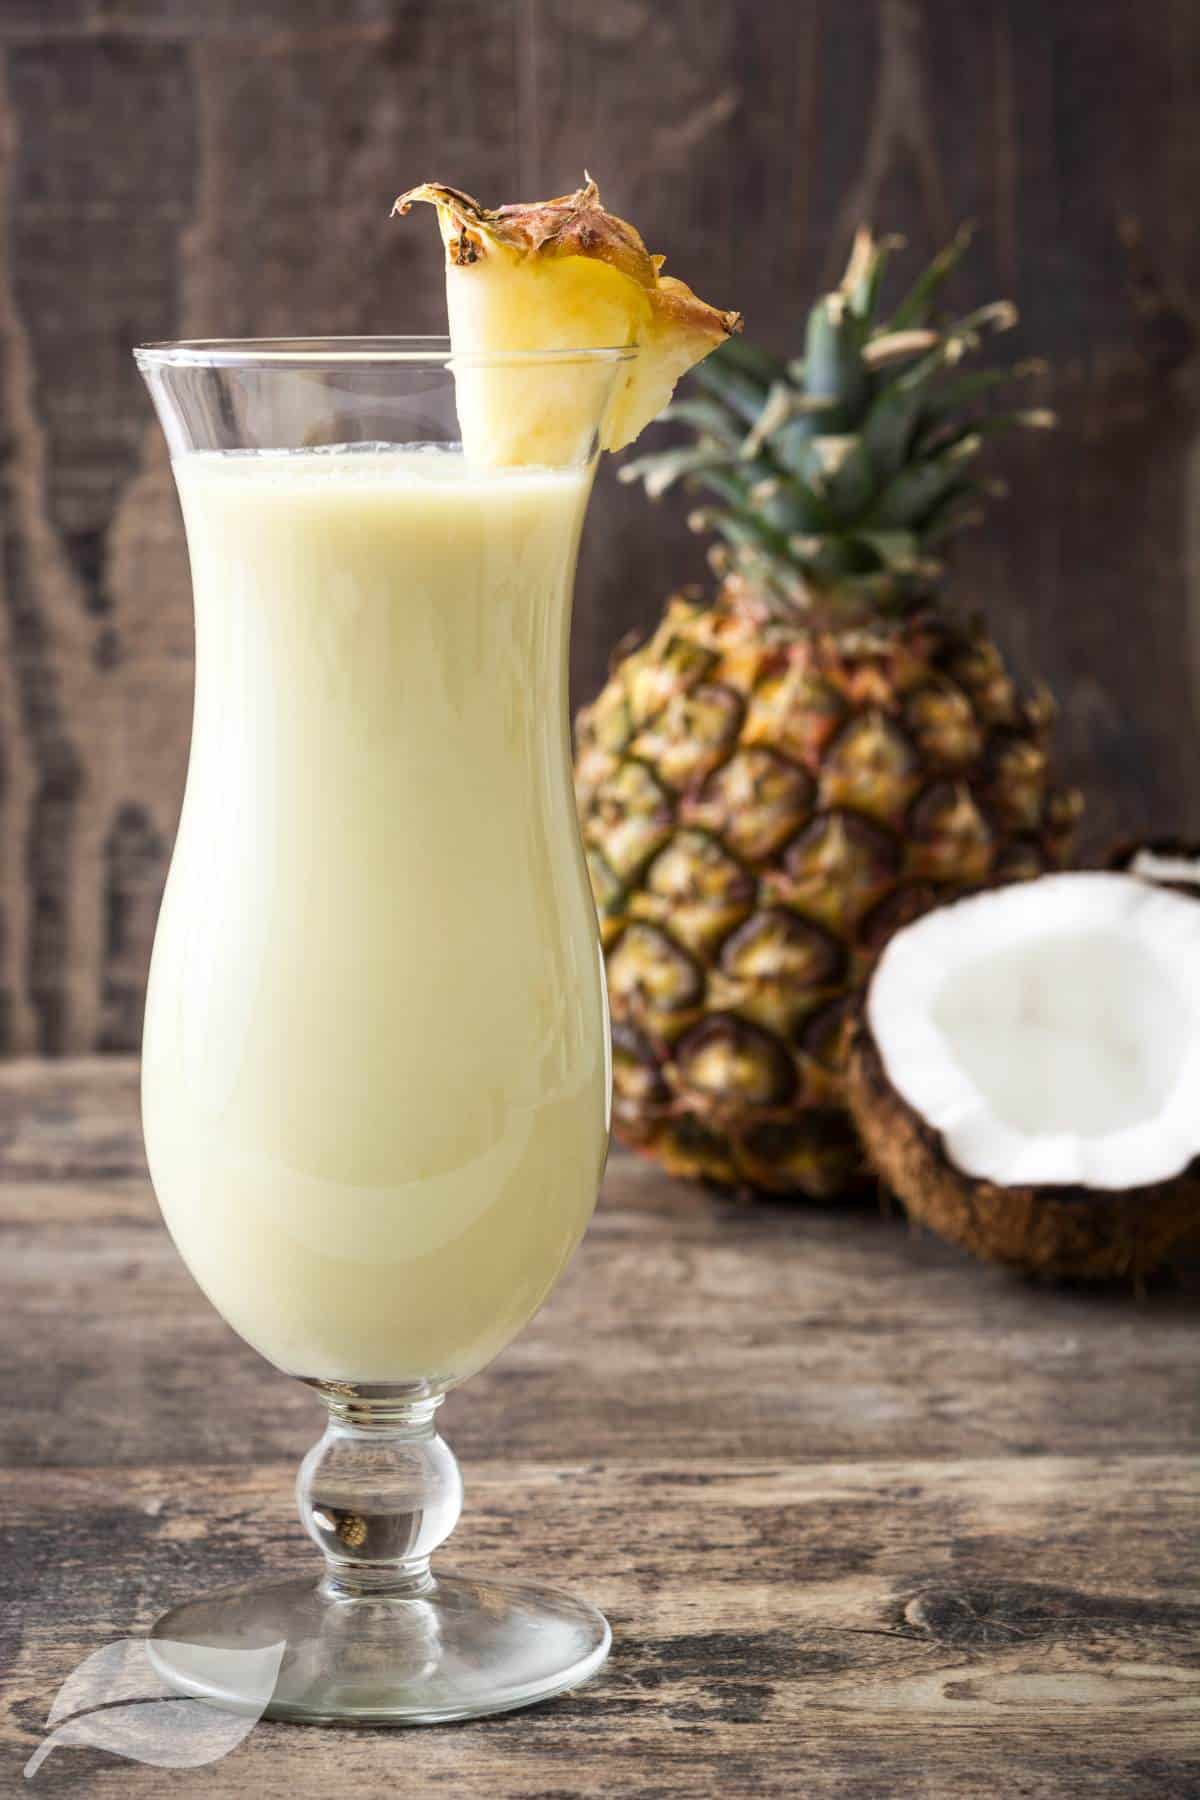 pina colada with pineapple next to the glass